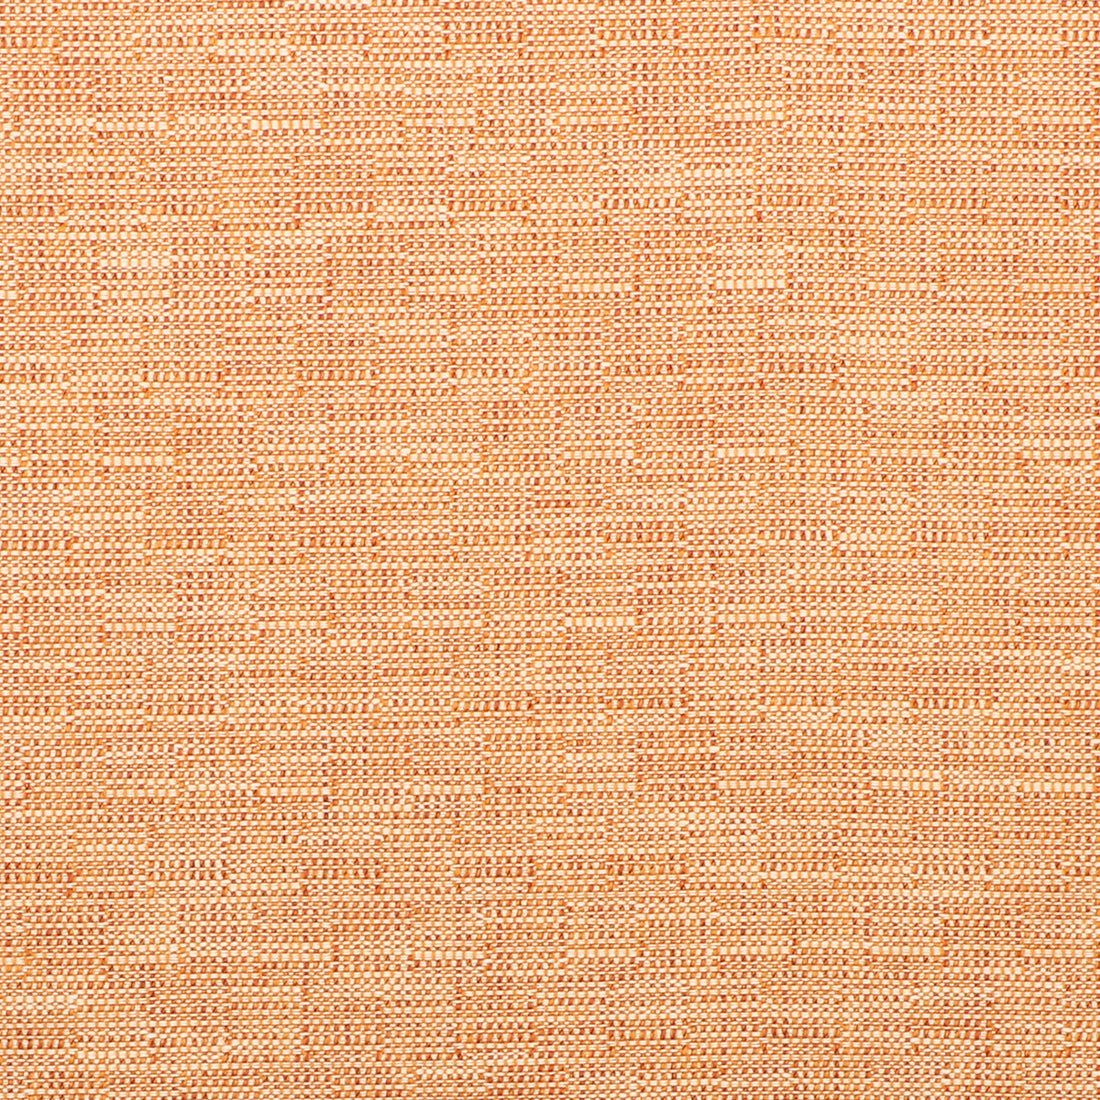 Kravet Smart fabric in 35518-12 color - pattern 35518.12.0 - by Kravet Smart in the Inside Out Performance Fabrics collection